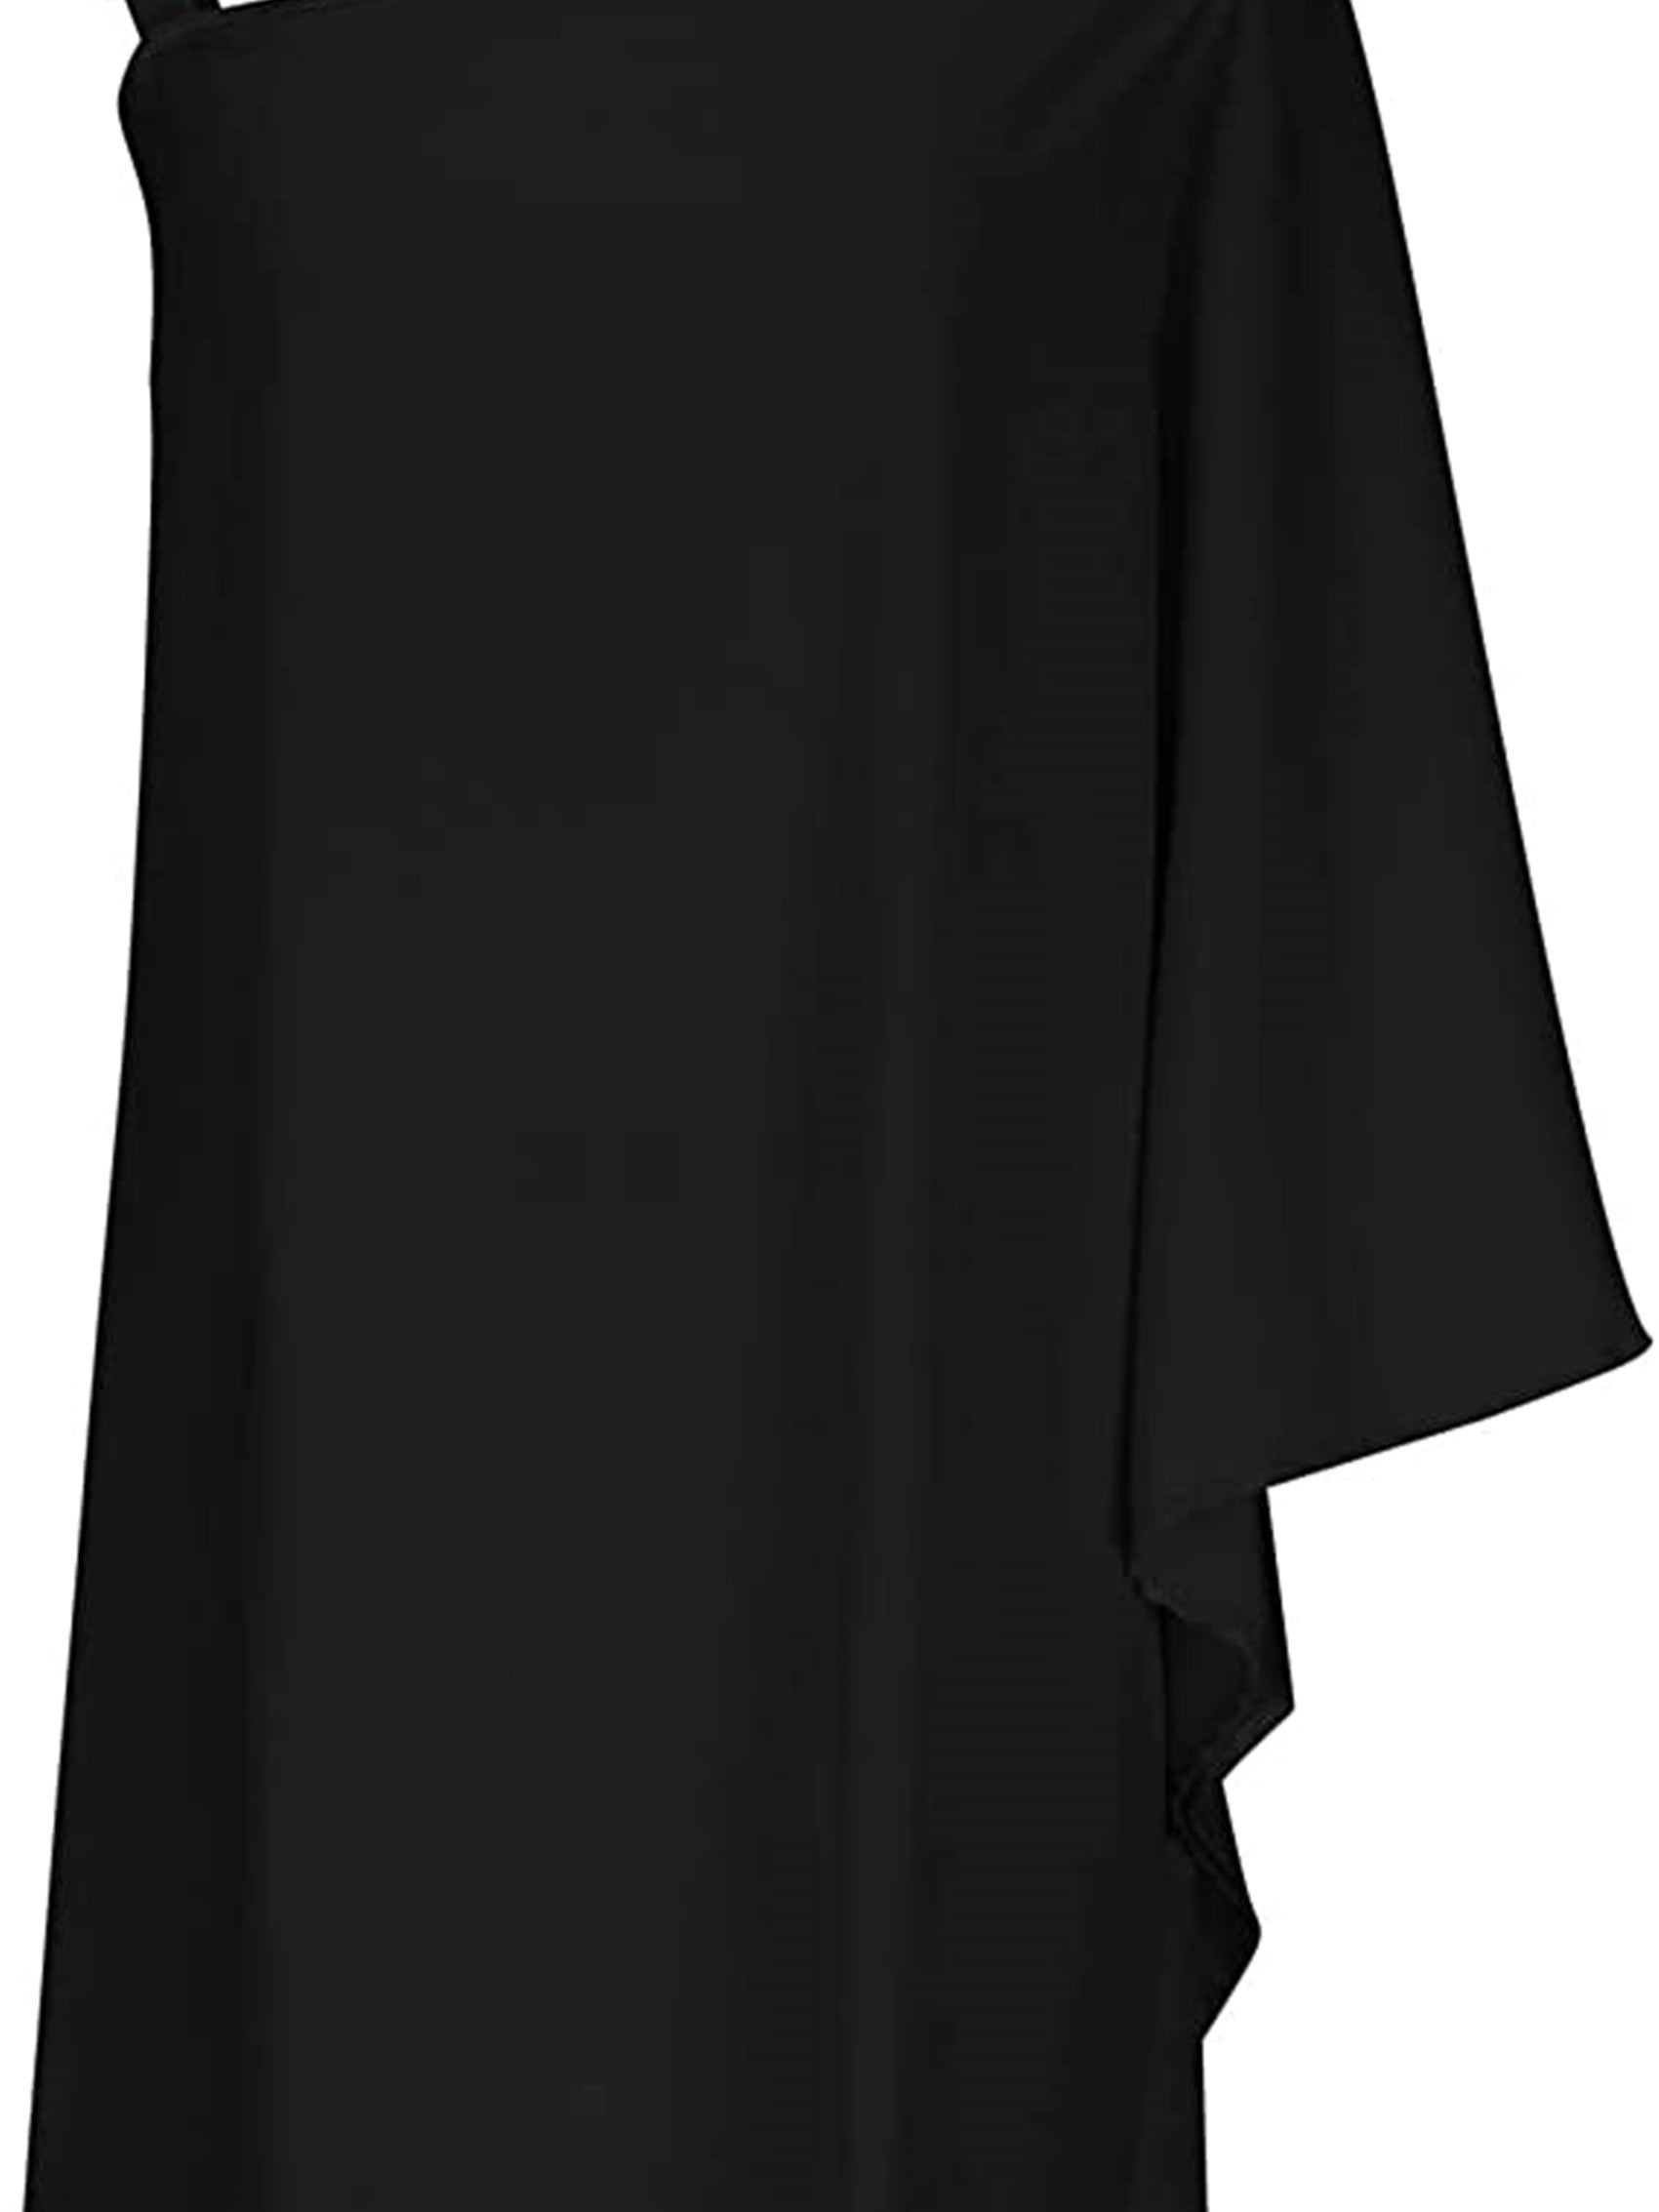 Batwing Sleeve Cold Shoulder Solid Evening Party Dress